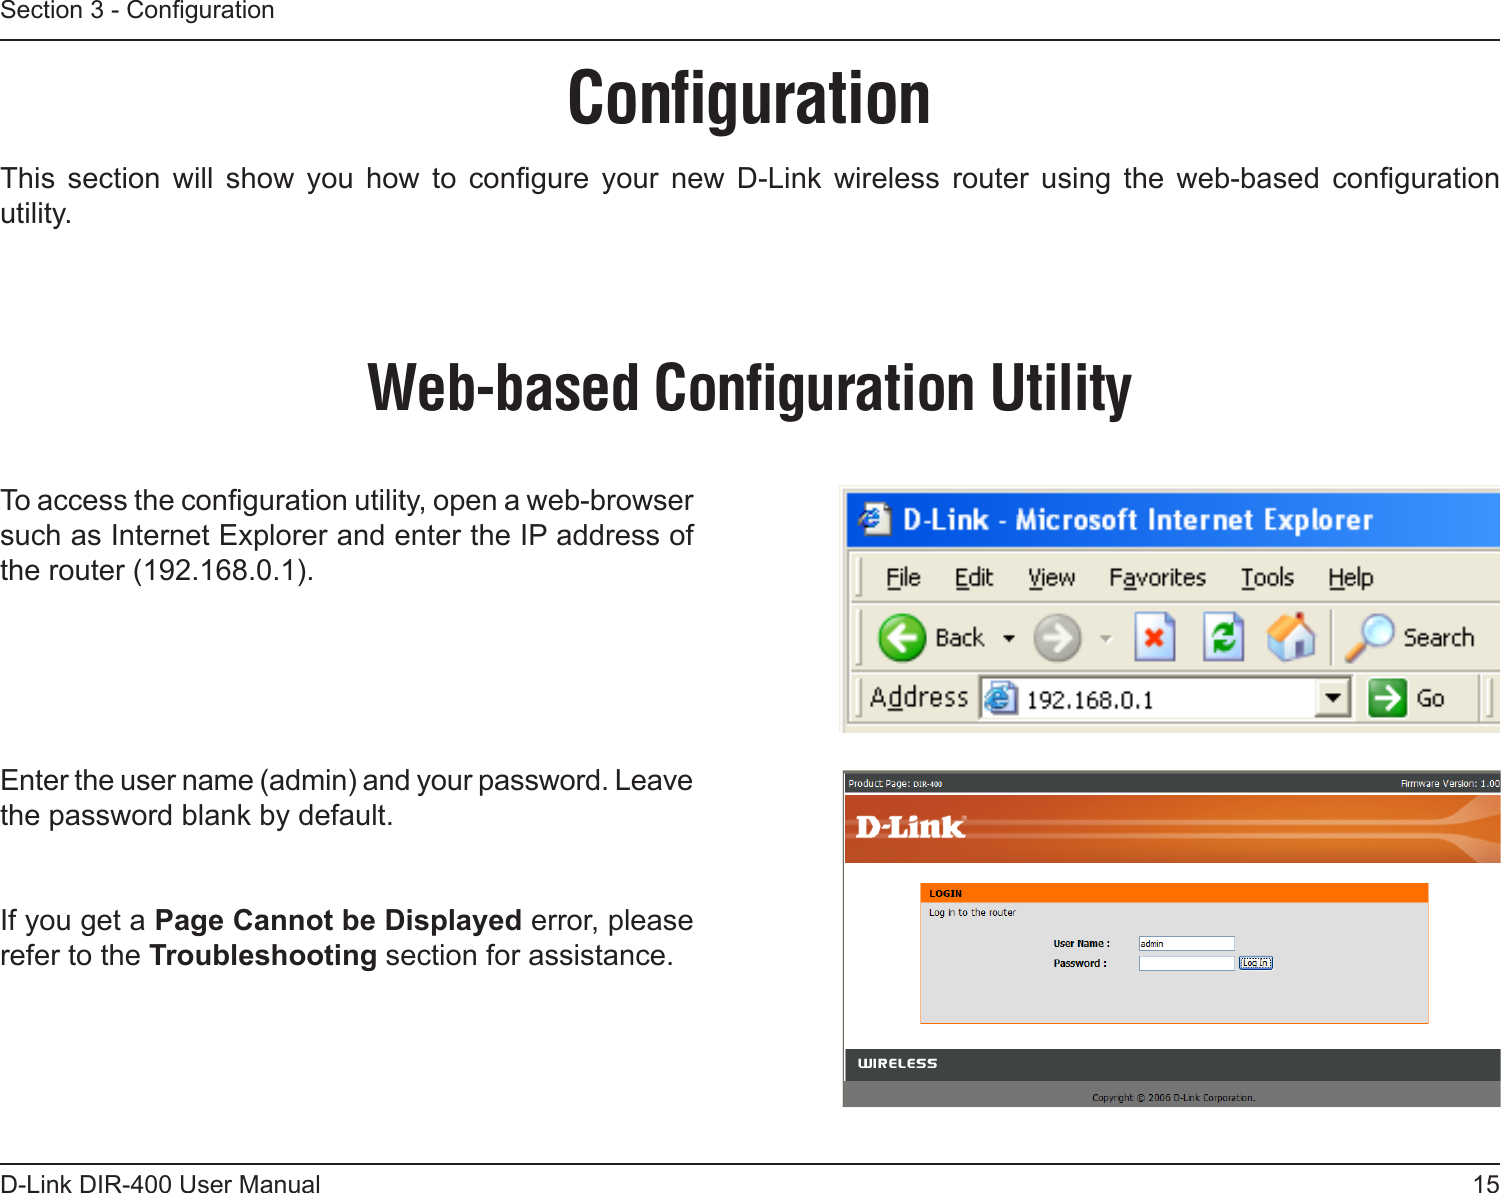 15D-Link DIR-400 User ManualSection 3 - CongurationConﬁgurationThis  section  will  show  you  how  to  congure  your  new  D-Link  wireless  router  using  the  web-based  conguration utility.Web-based Conﬁguration UtilityTo access the conguration utility, open a web-browser such as Internet Explorer and enter the IP address of the router (192.168.0.1).Enter the user name (admin) and your password. Leave the password blank by default.If you get a Page Cannot be Displayed error, please refer to the Troubleshooting section for assistance.